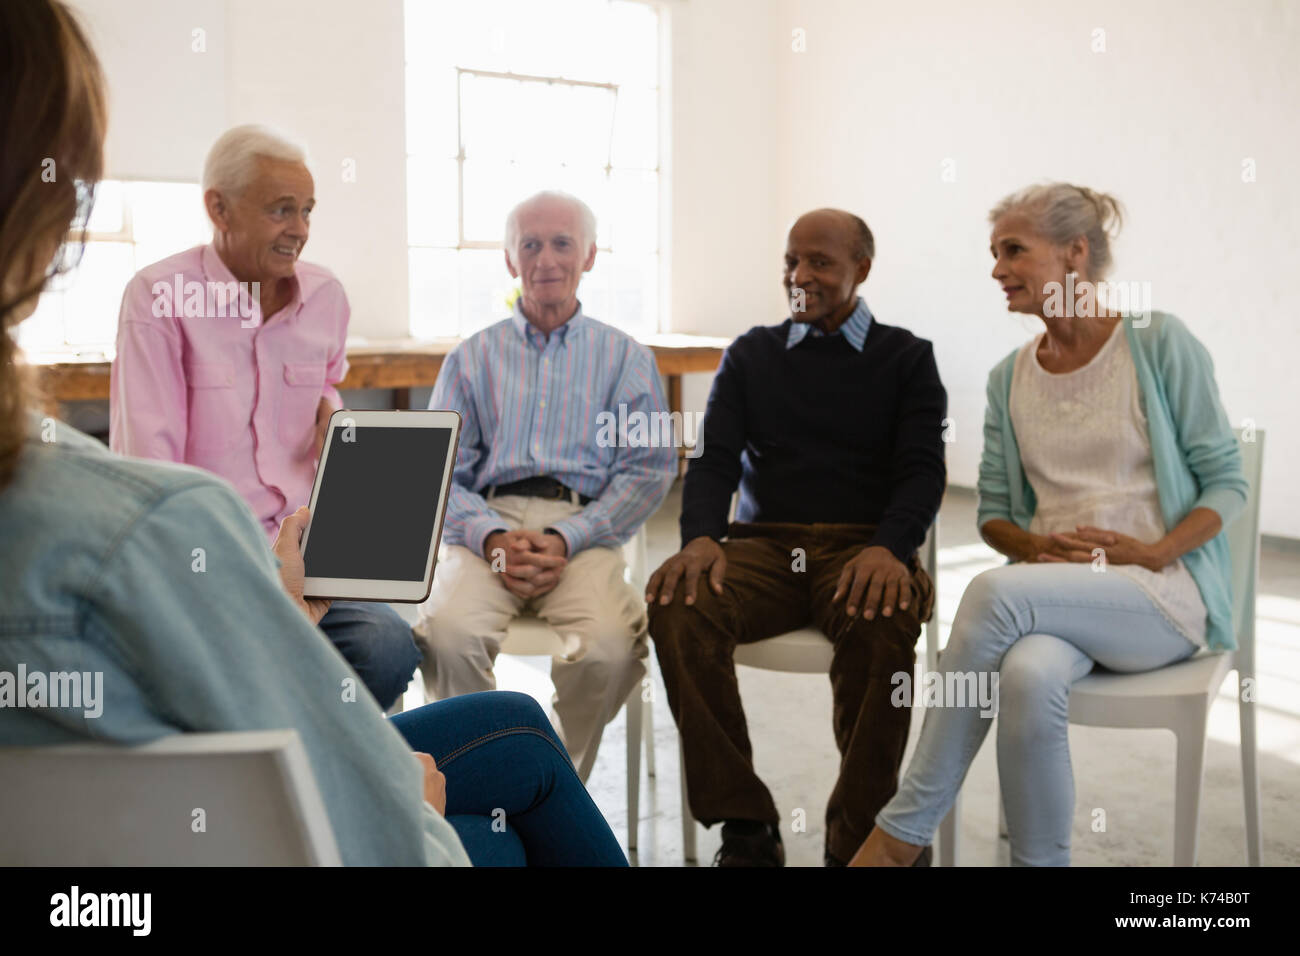 Woman holding tablet computer while discussing with senior adults in art class Stock Photo